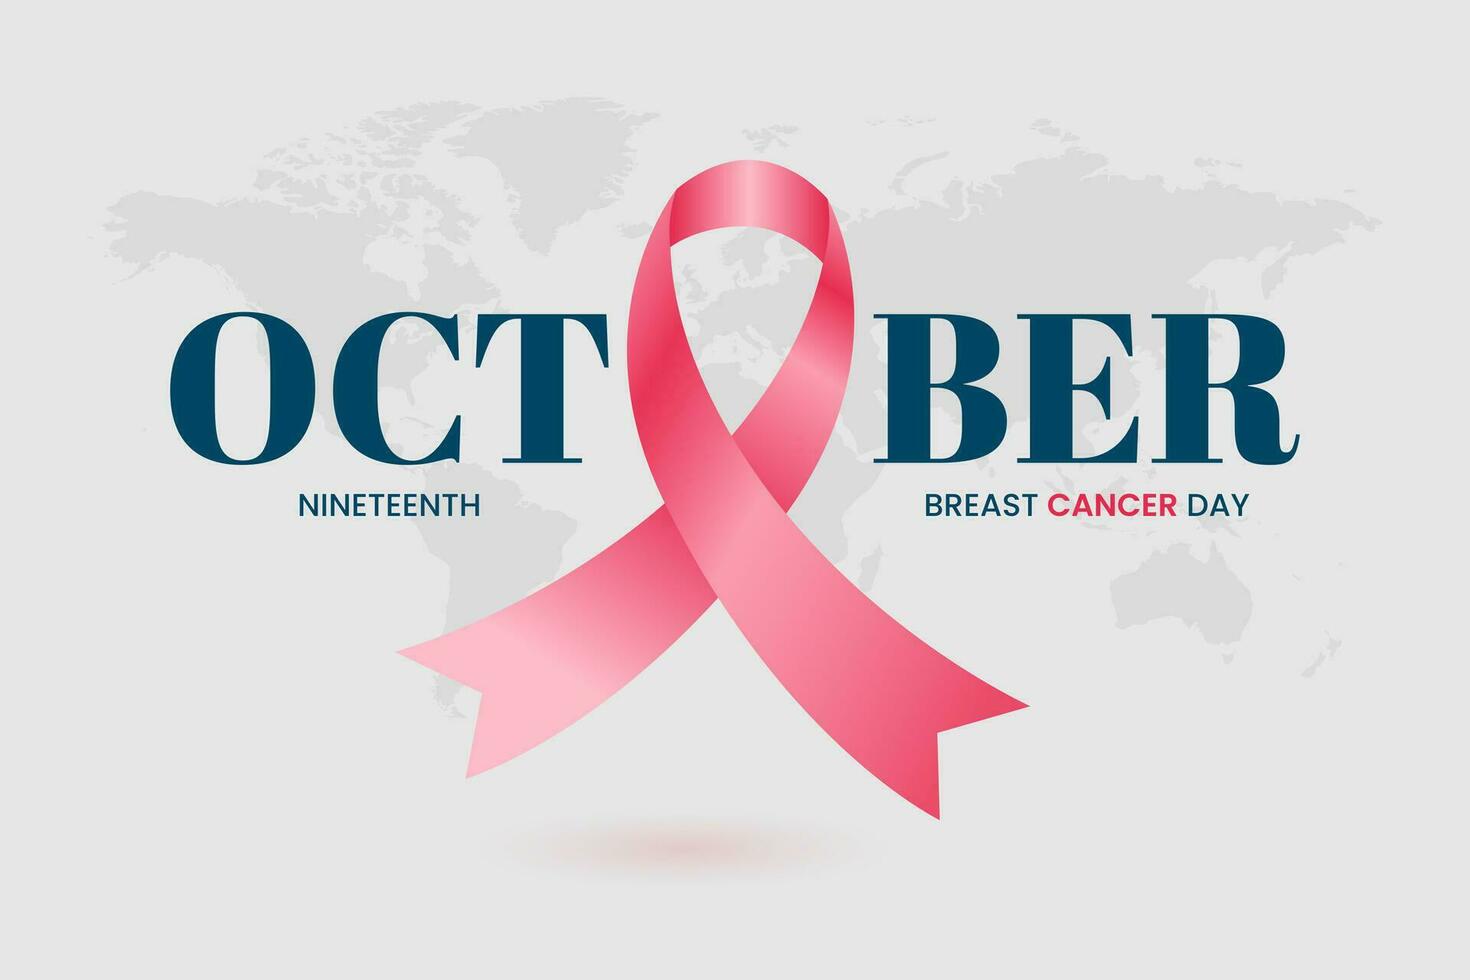 Breast Cancer Day October 19th banner design with pink ribbon and world map background vector